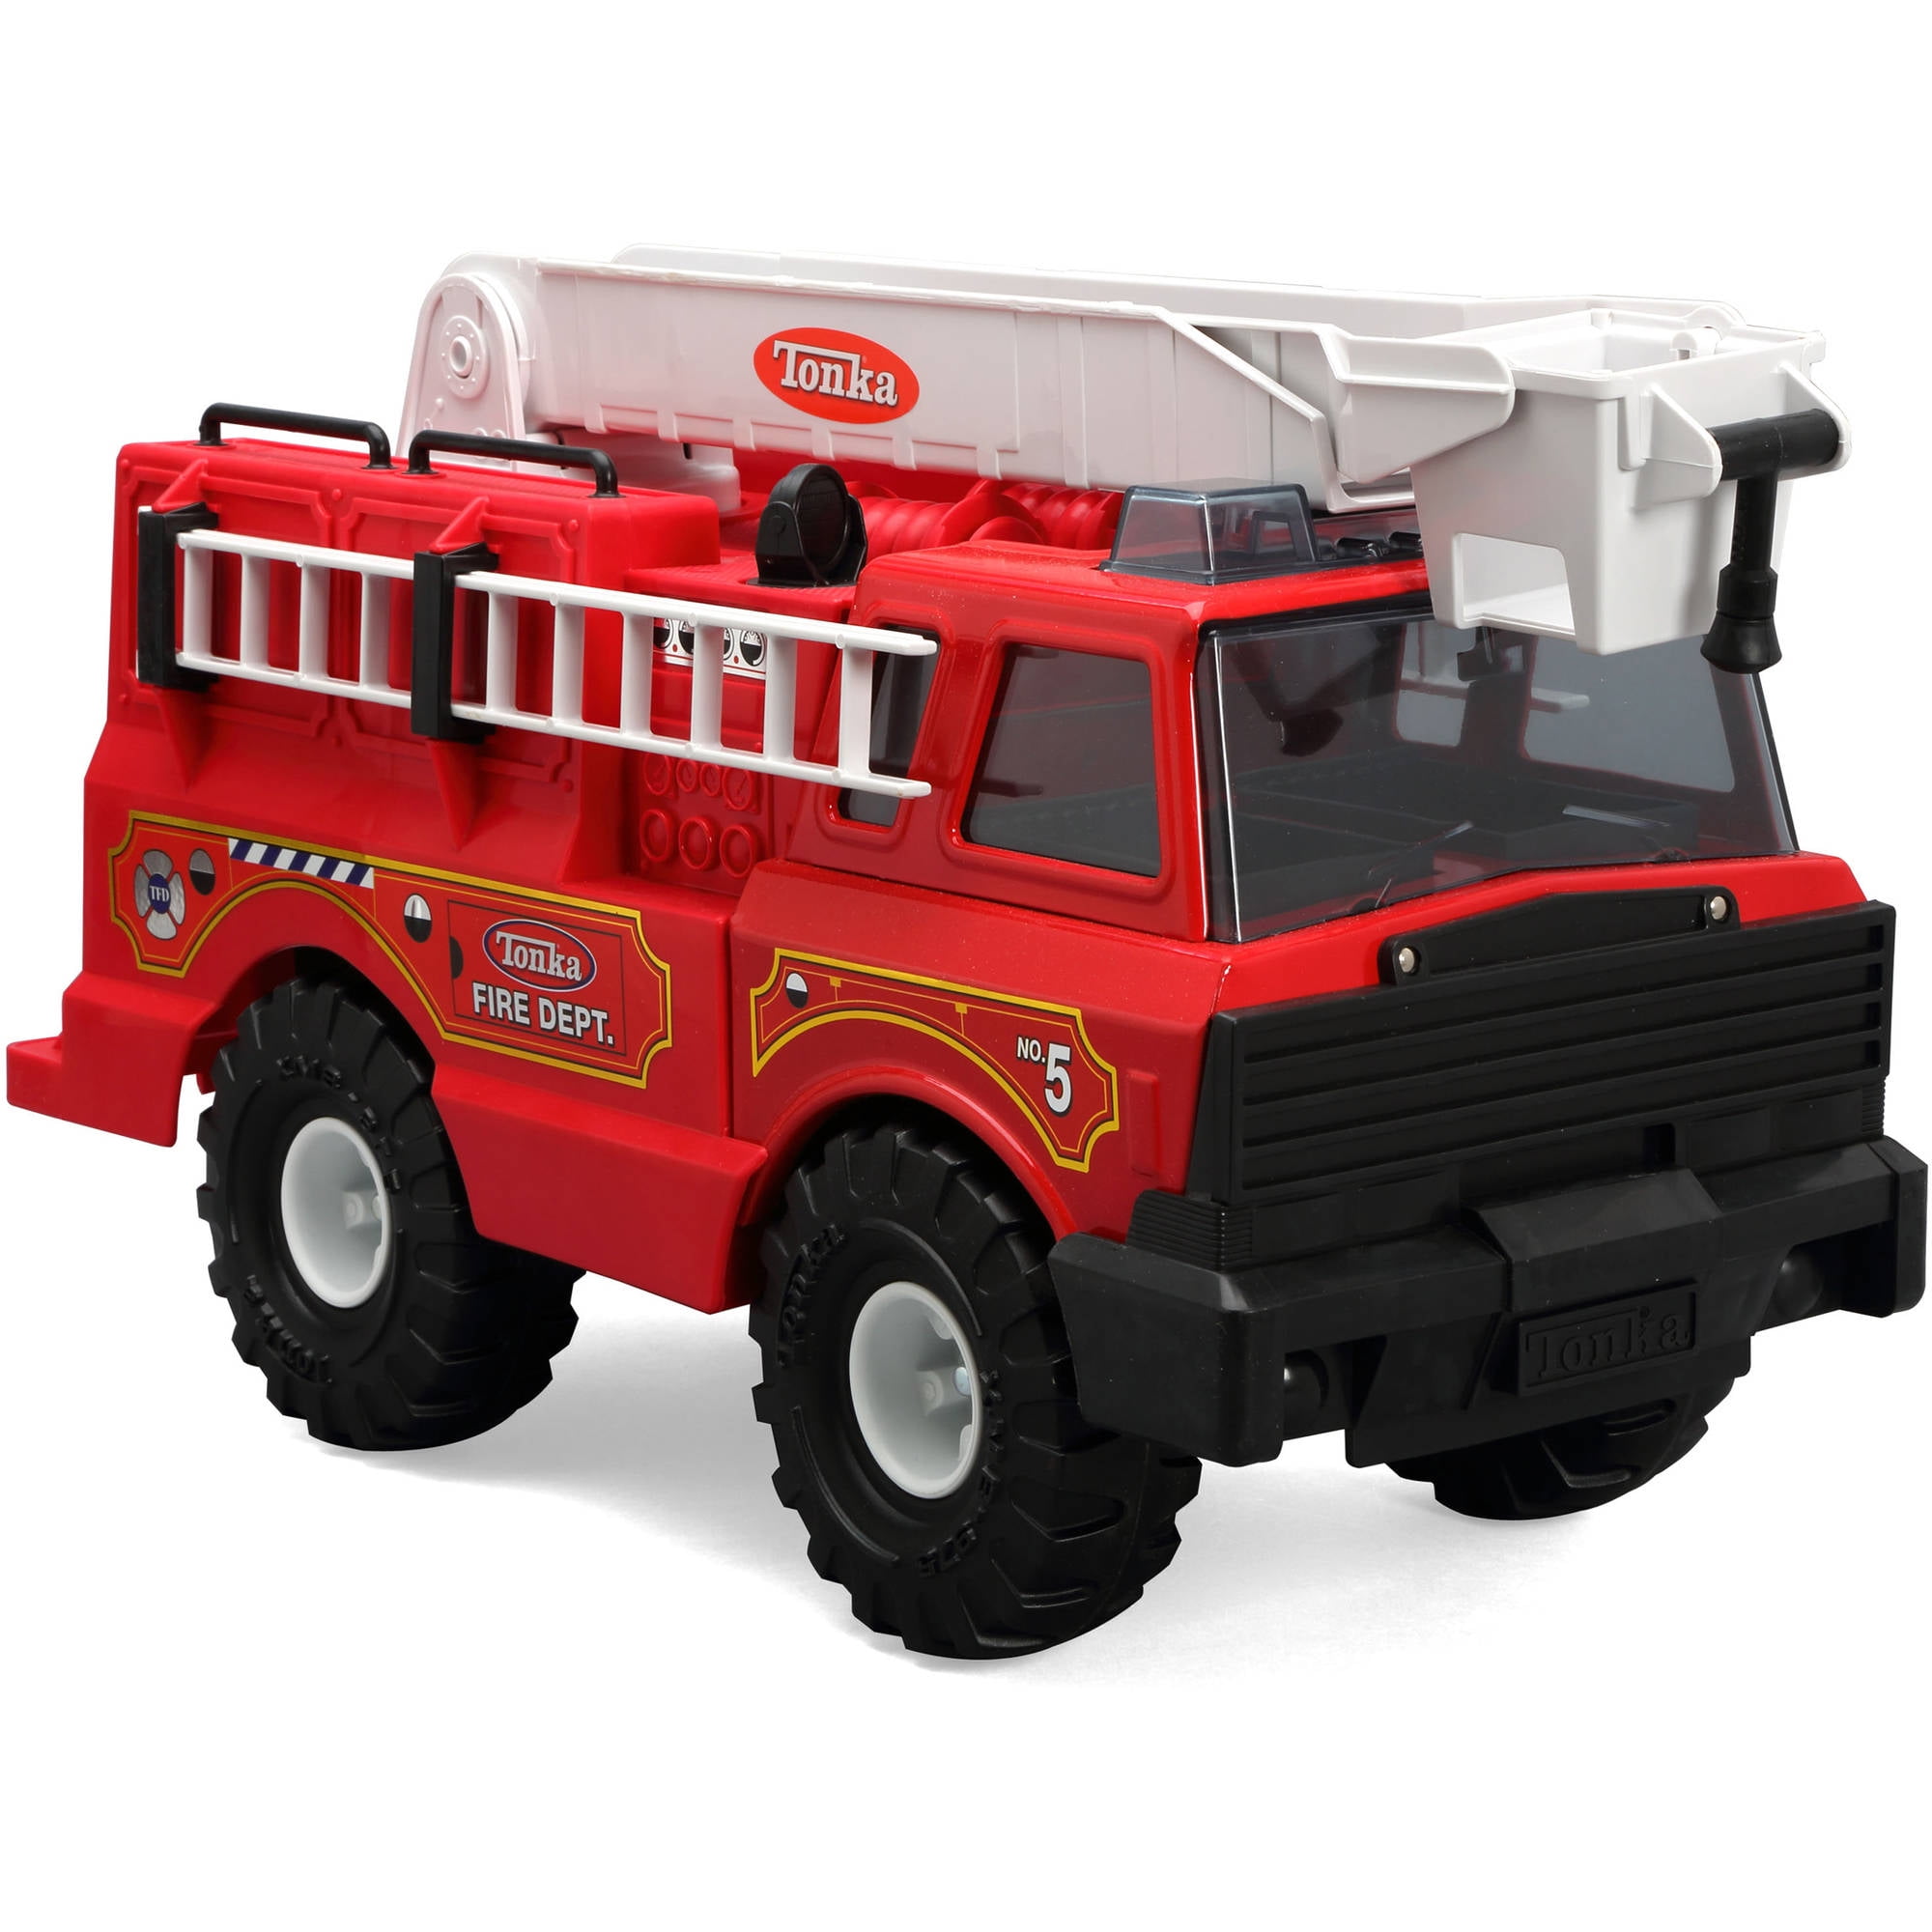 life size fire truck toy